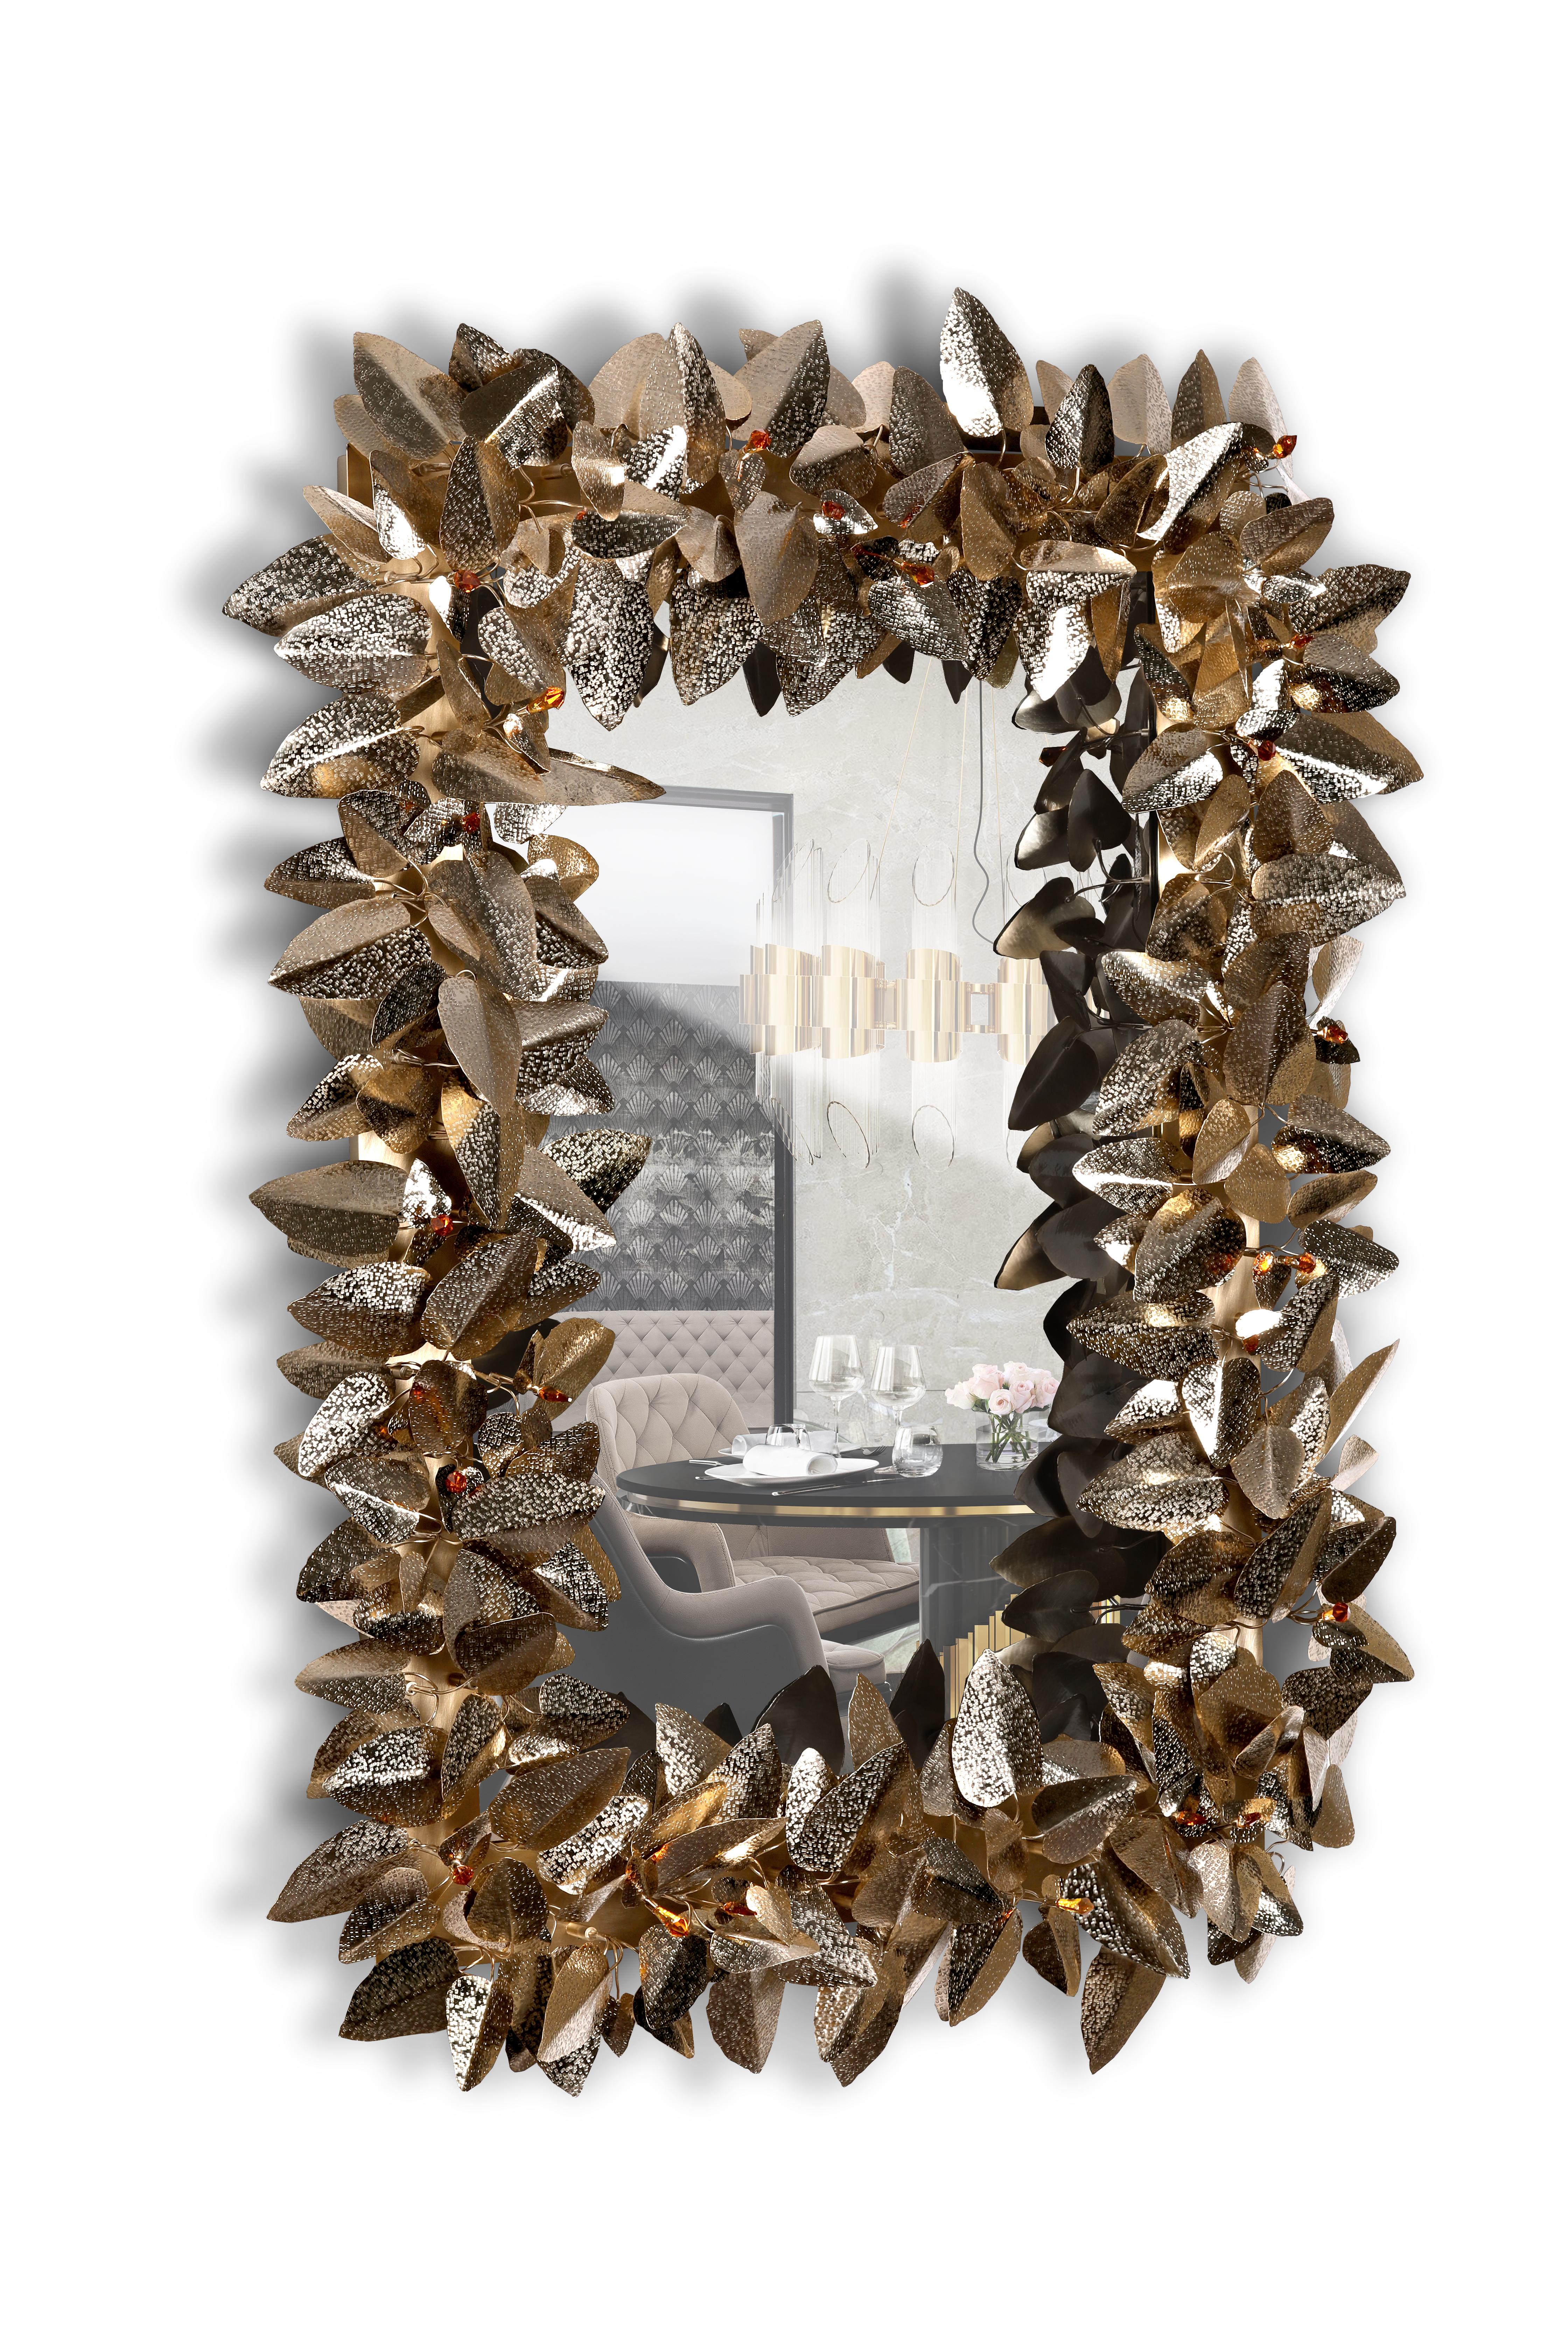 In line with the entire McQueen family, this McQueen rectangular light mirror is a meticulously designed beauty object. The tradition of the jewelry artisans is kept in this approach to contemporary luxury. A sublime and powerful evocation of savage